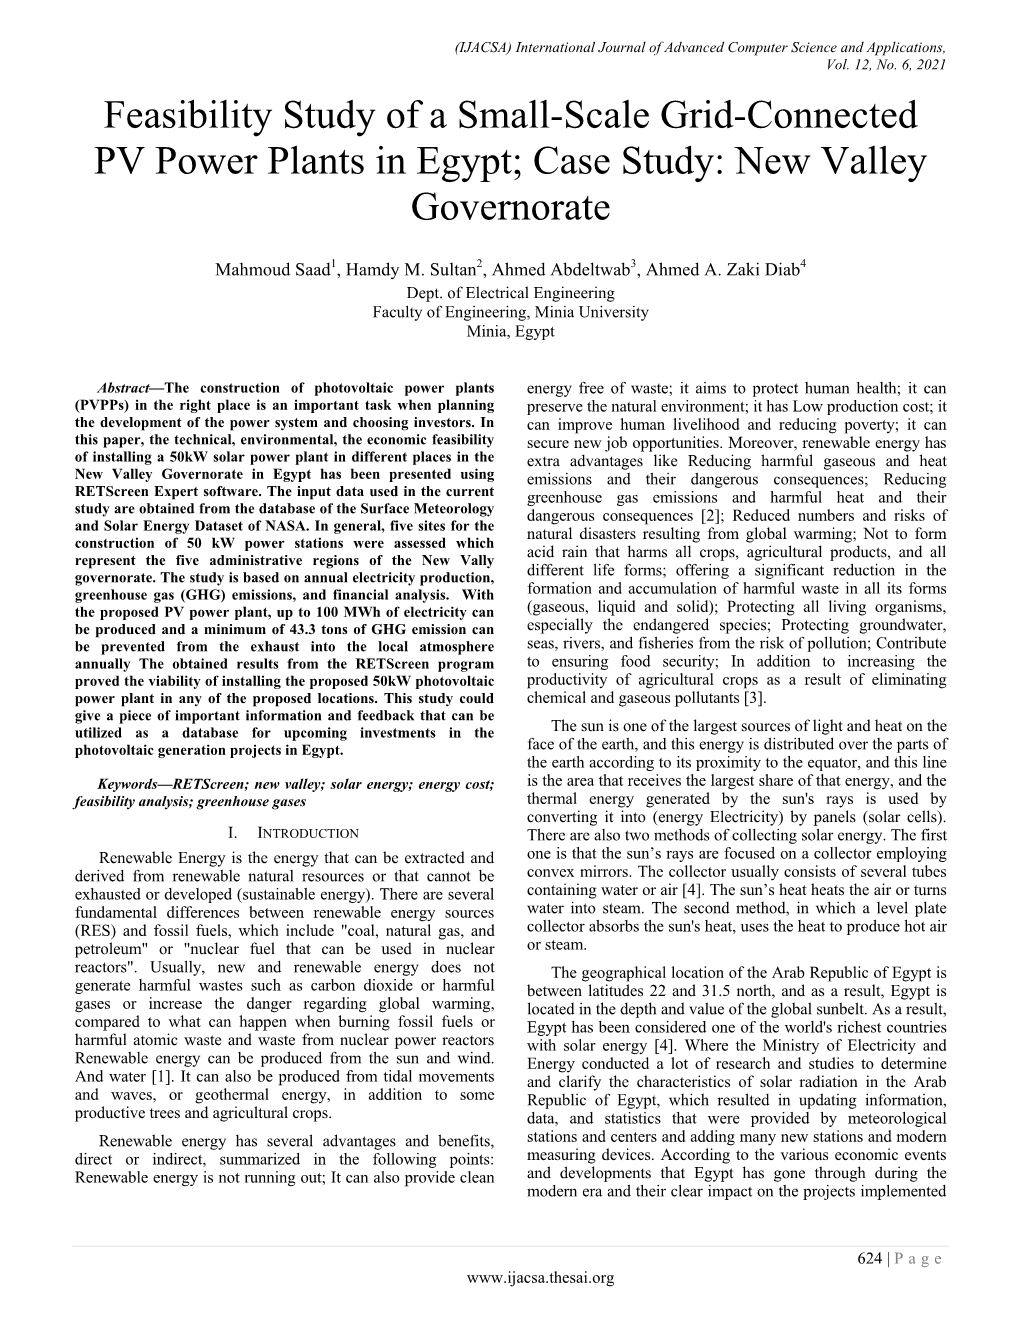 Feasibility Study of a Small-Scale Grid-Connected PV Power Plants in Egypt; Case Study: New Valley Governorate